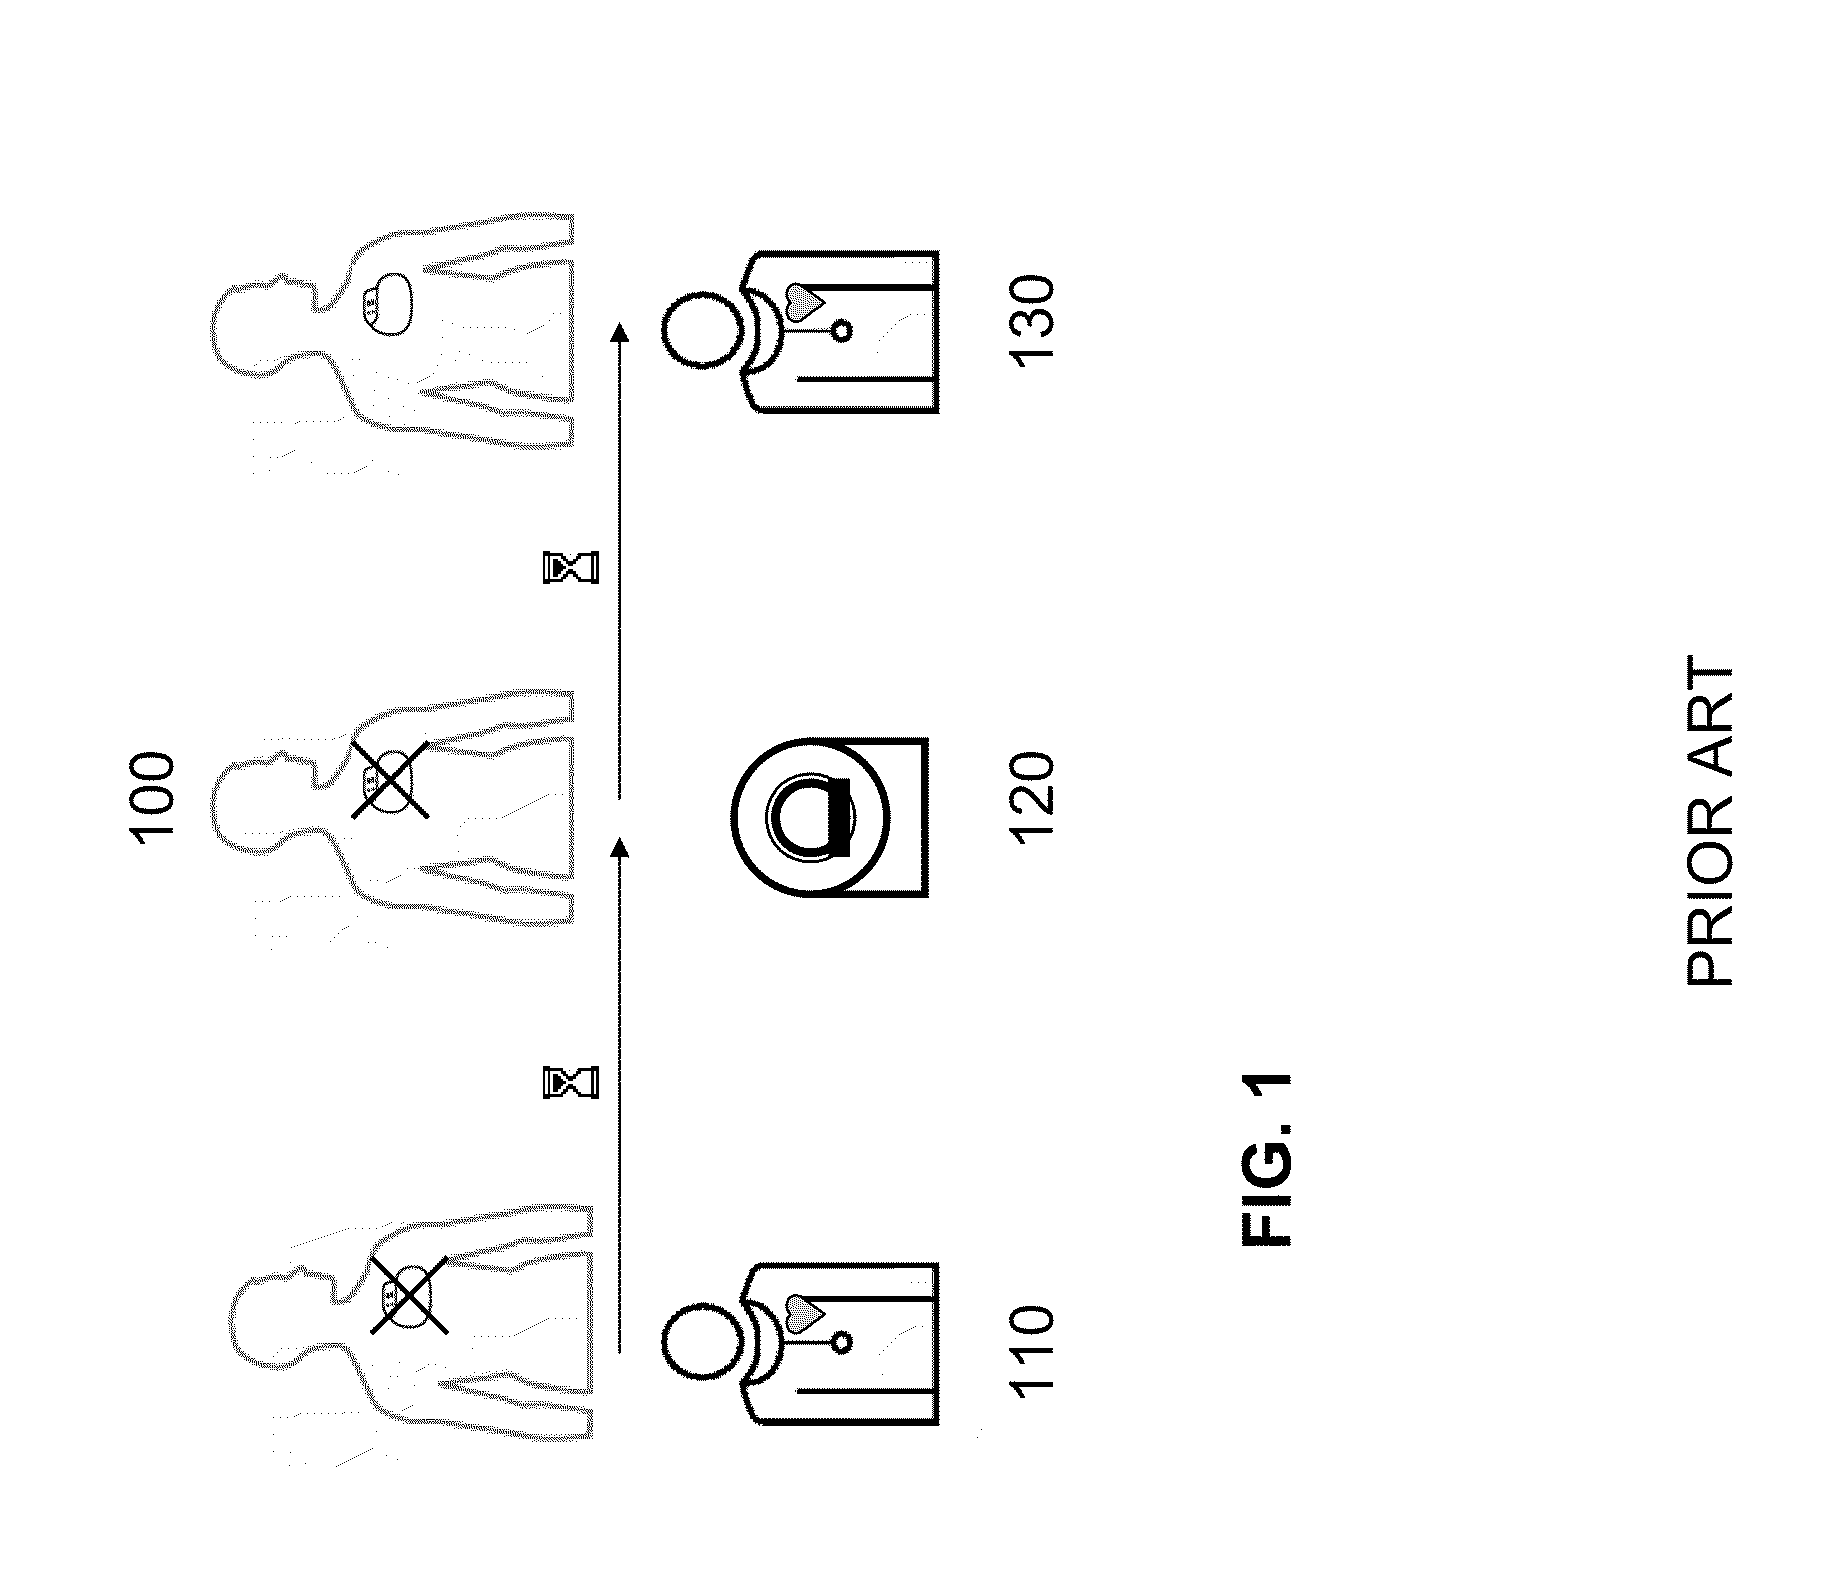 Switched protective device against electromagnetic interference